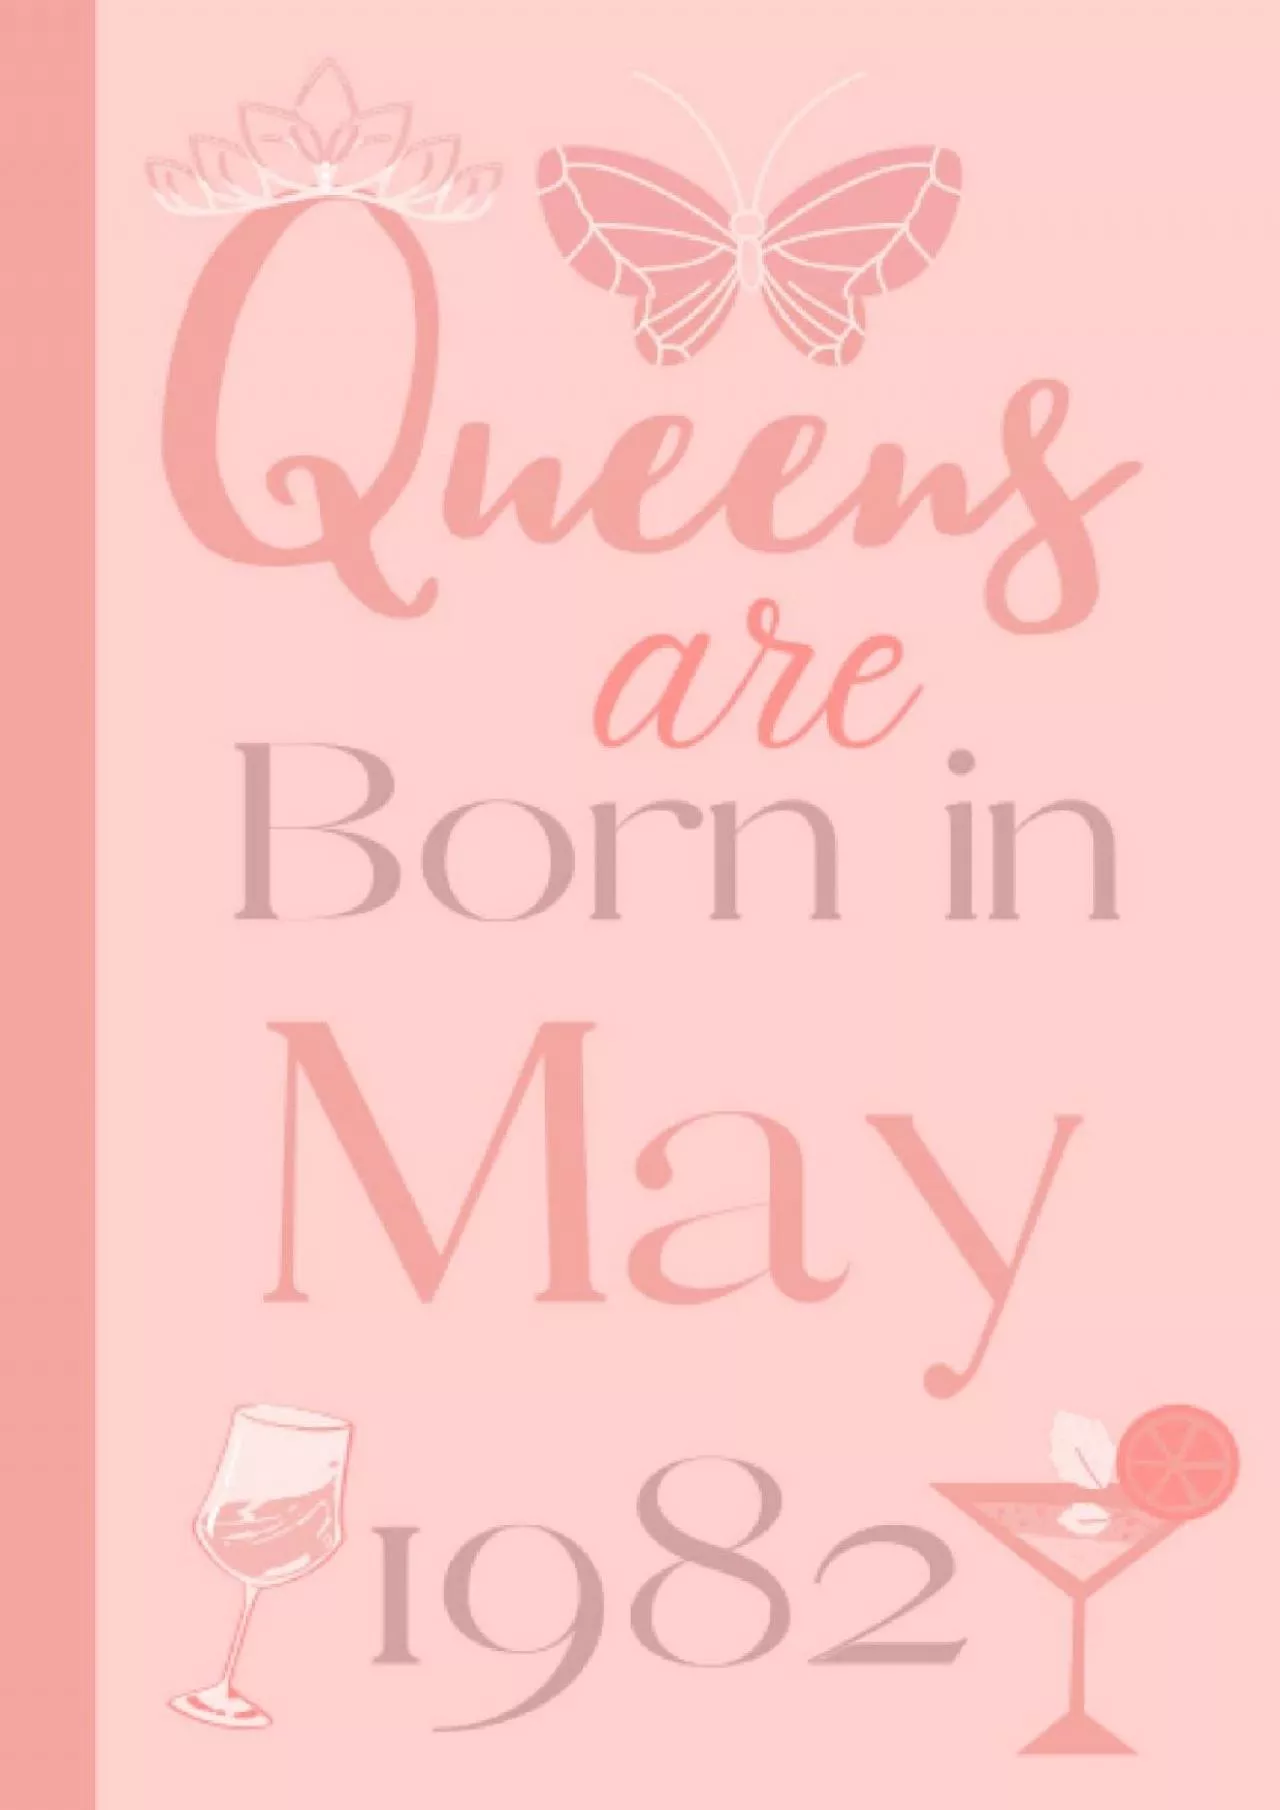 [READ] 40th Birthday Gift: Queens Are Born in March 1982: Funny Useful Personalized Gifts